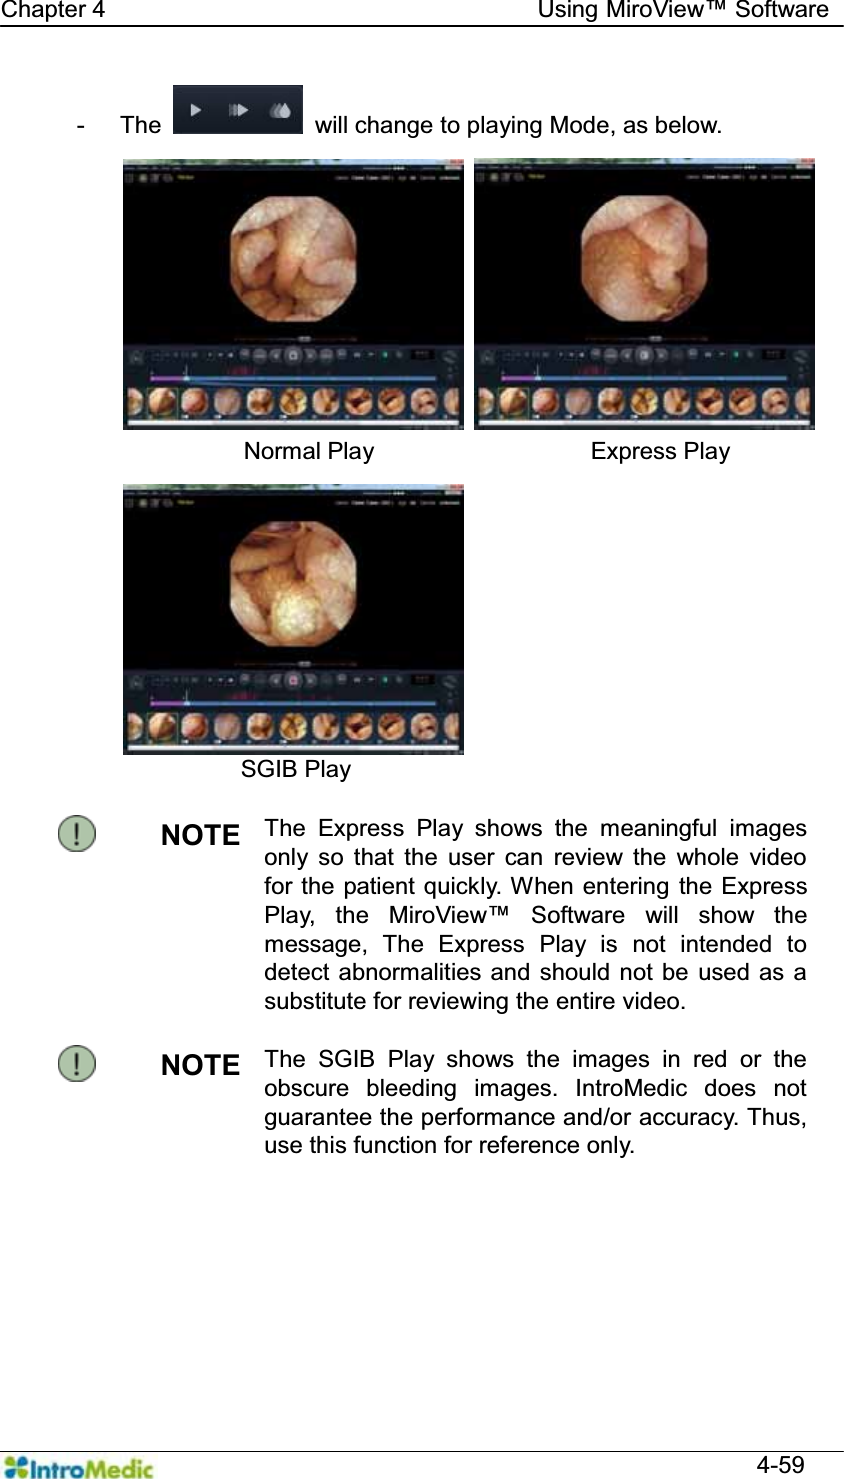   Chapter 4                                    Using 0LUR9LHZ Software  4-59 - The    will change to playing Mode, as below.              Normal Play                  Express Play SGIB Play  NOTE  The Express Play shows the meaningful images only so that the user can review the whole video for the patient quickly. When entering the Express Play, the 0LUR9LHZ Software will show the message, The Express Play is not intended to detect abnormalities and should not be used as a substitute for reviewing the entire video.  NOTE  The SGIB Play shows the images in red or the obscure bleeding images. IntroMedic does not guarantee the performance and/or accuracy. Thus, use this function for reference only.  